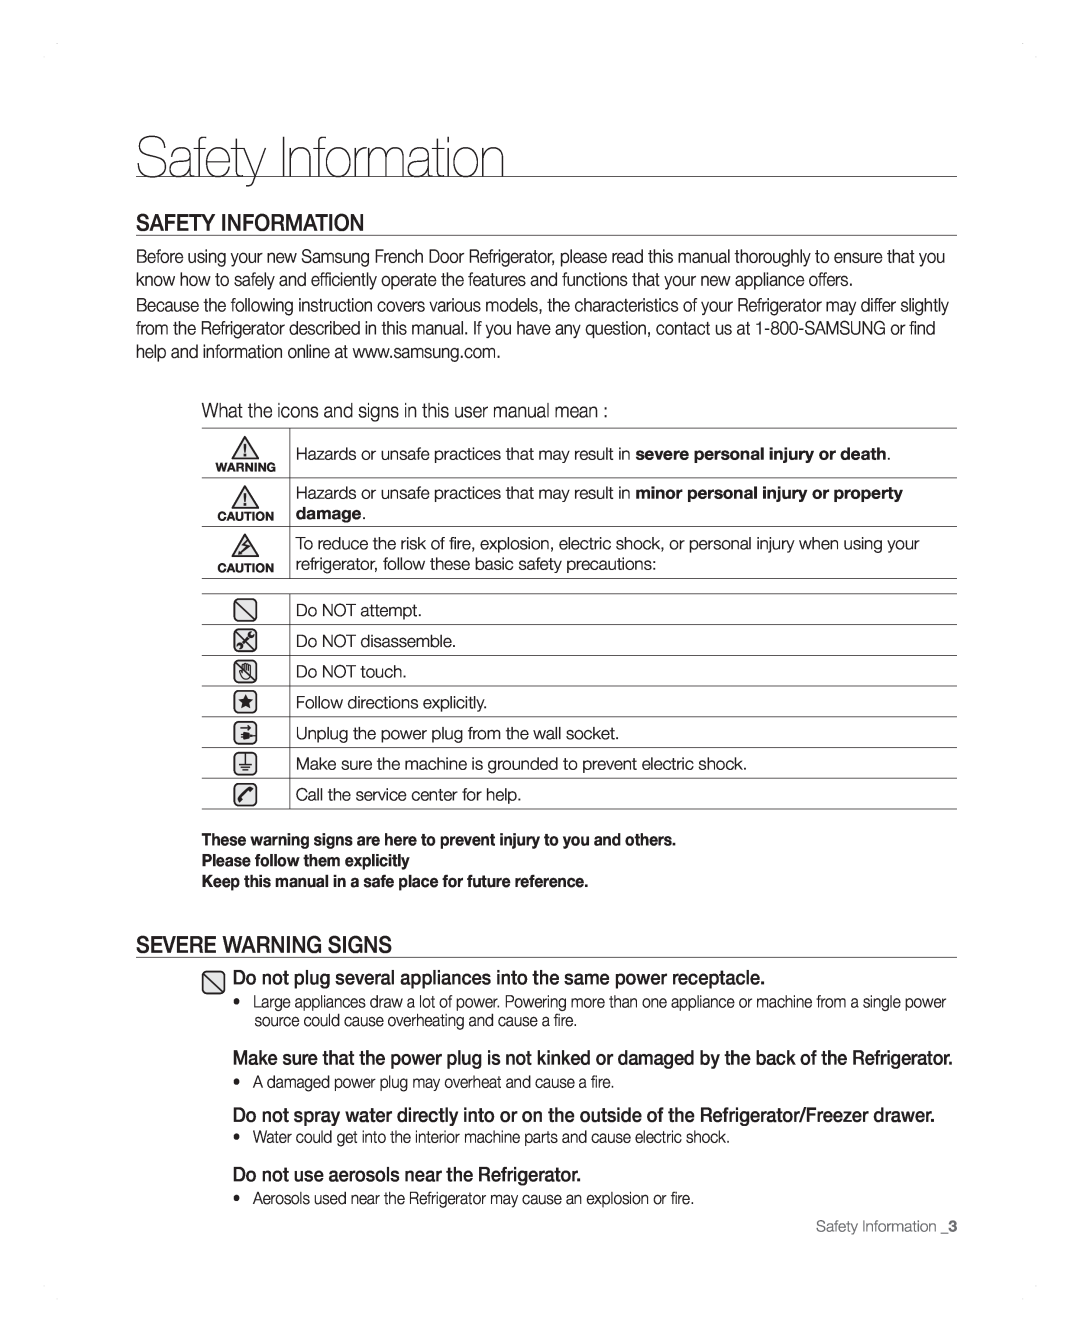 Samsung RFG297AARS Safety Information, Severe Warning Signs, What the icons and signs in this user manual mean, damage 